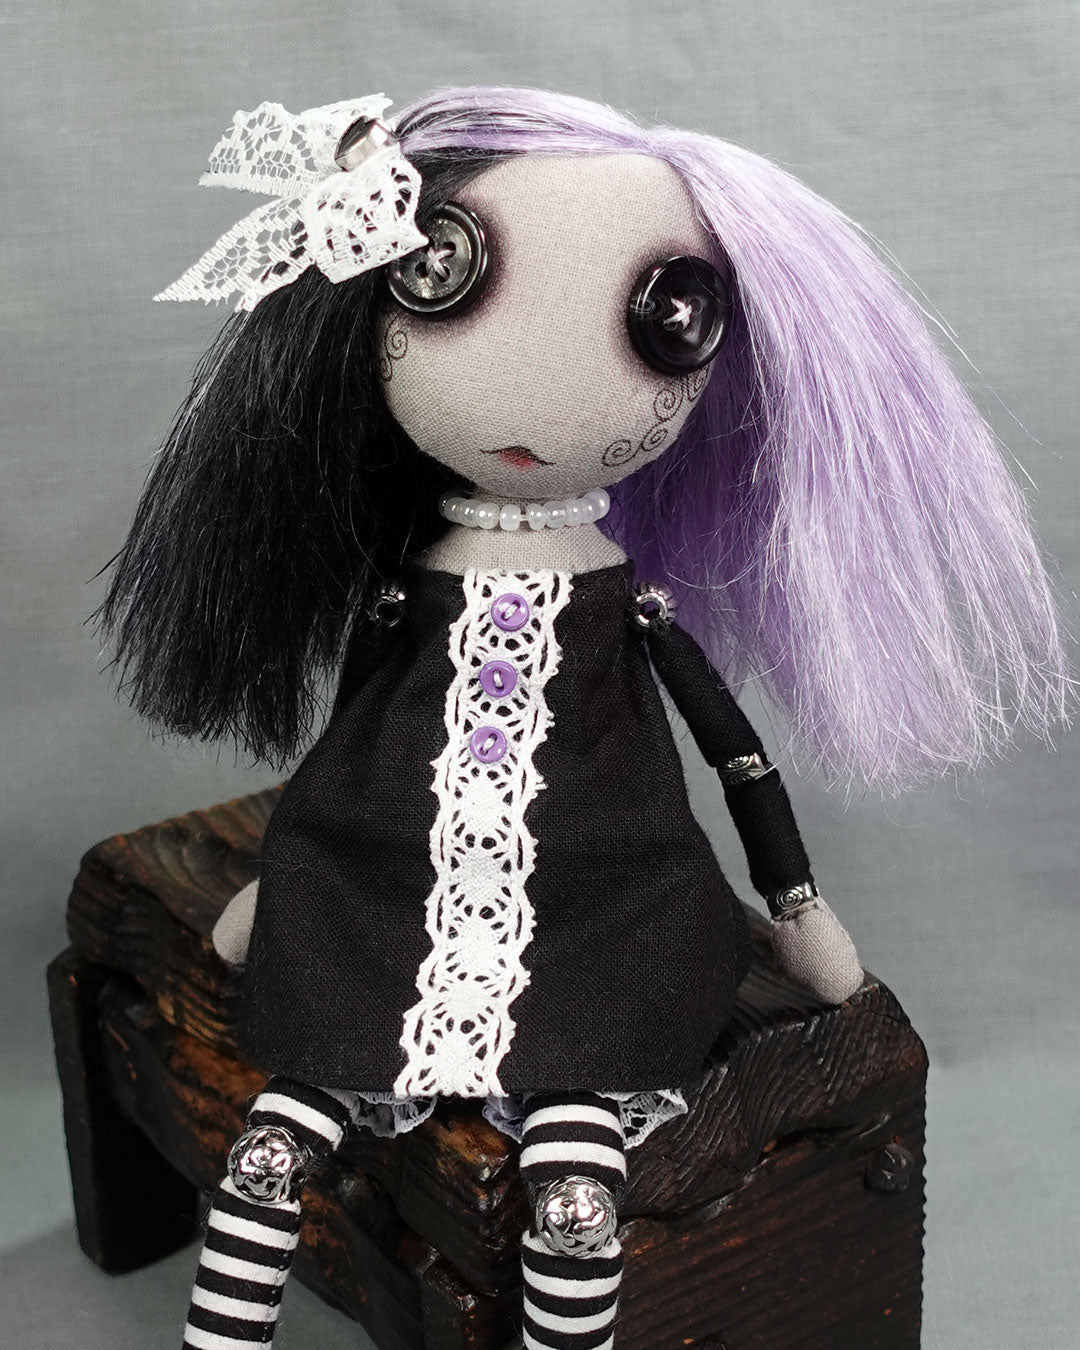 button eyed gothic cloth doll in black and white dress